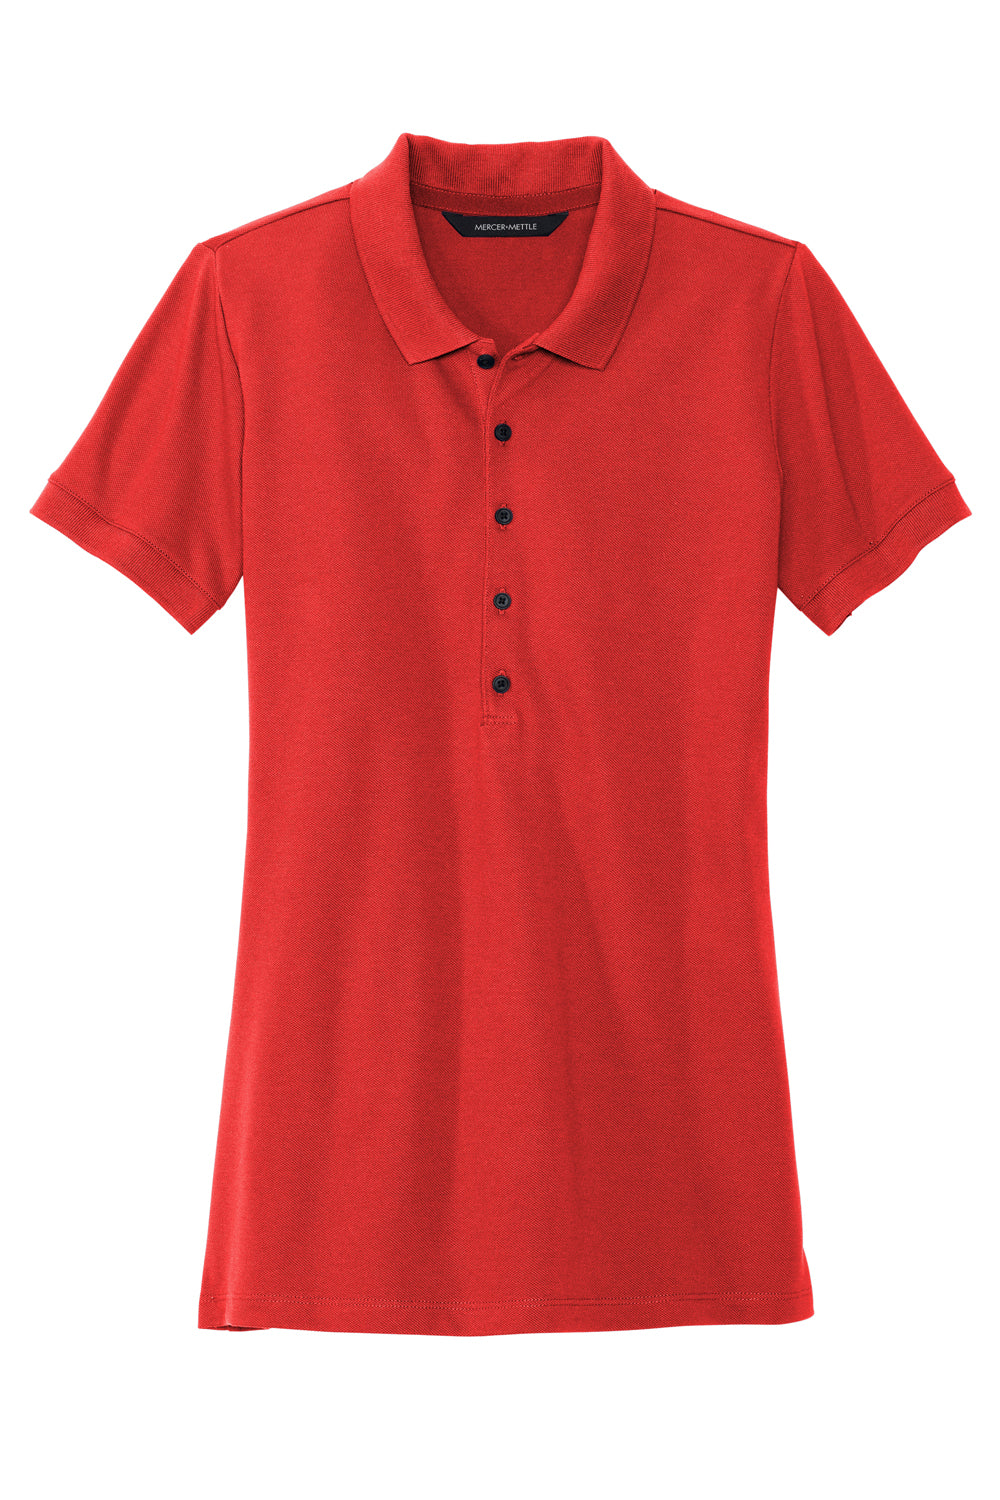 Mercer+Mettle MM1001 Stretch Pique Short Sleeve Polo Shirt Apple Red Flat Front